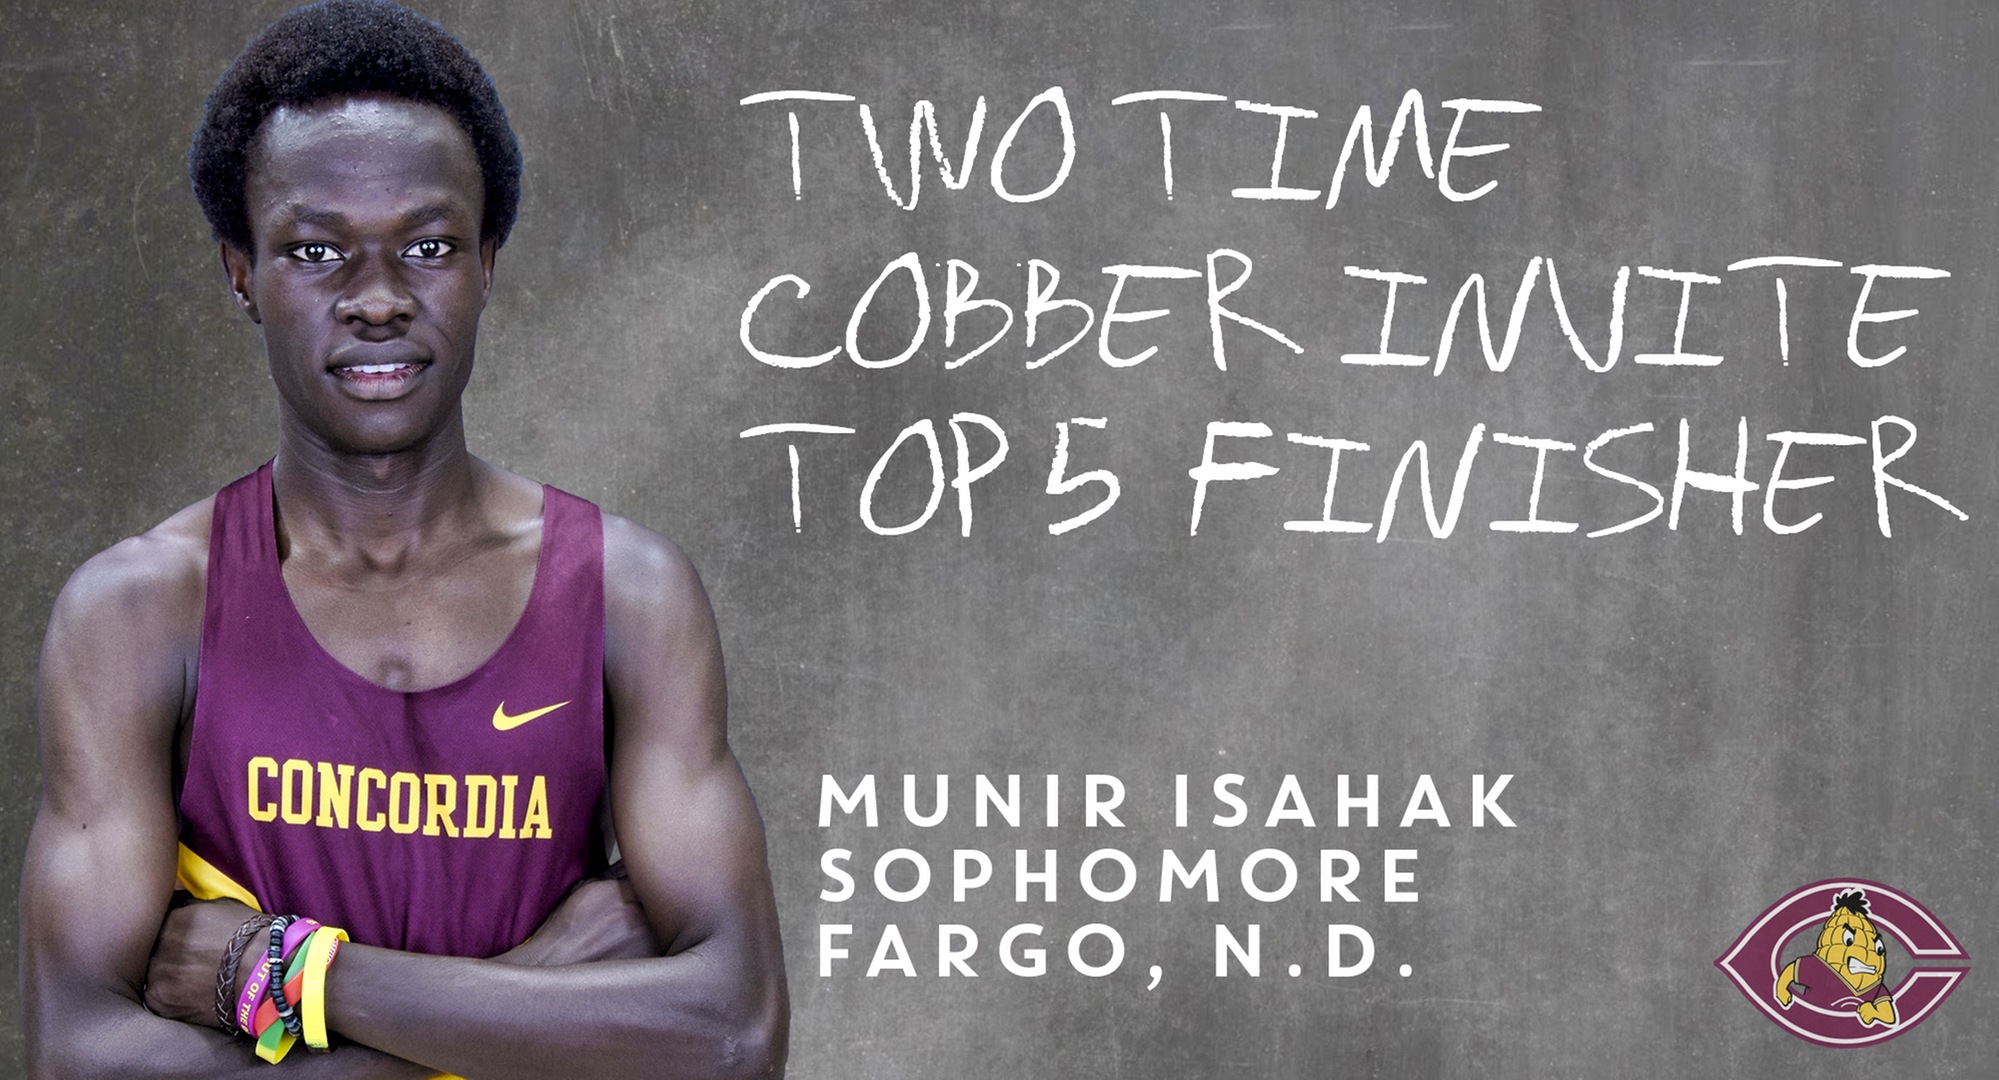 Sophomore Munir Isahak recorded his second straight Top 5 finish at the Cobber Invite.